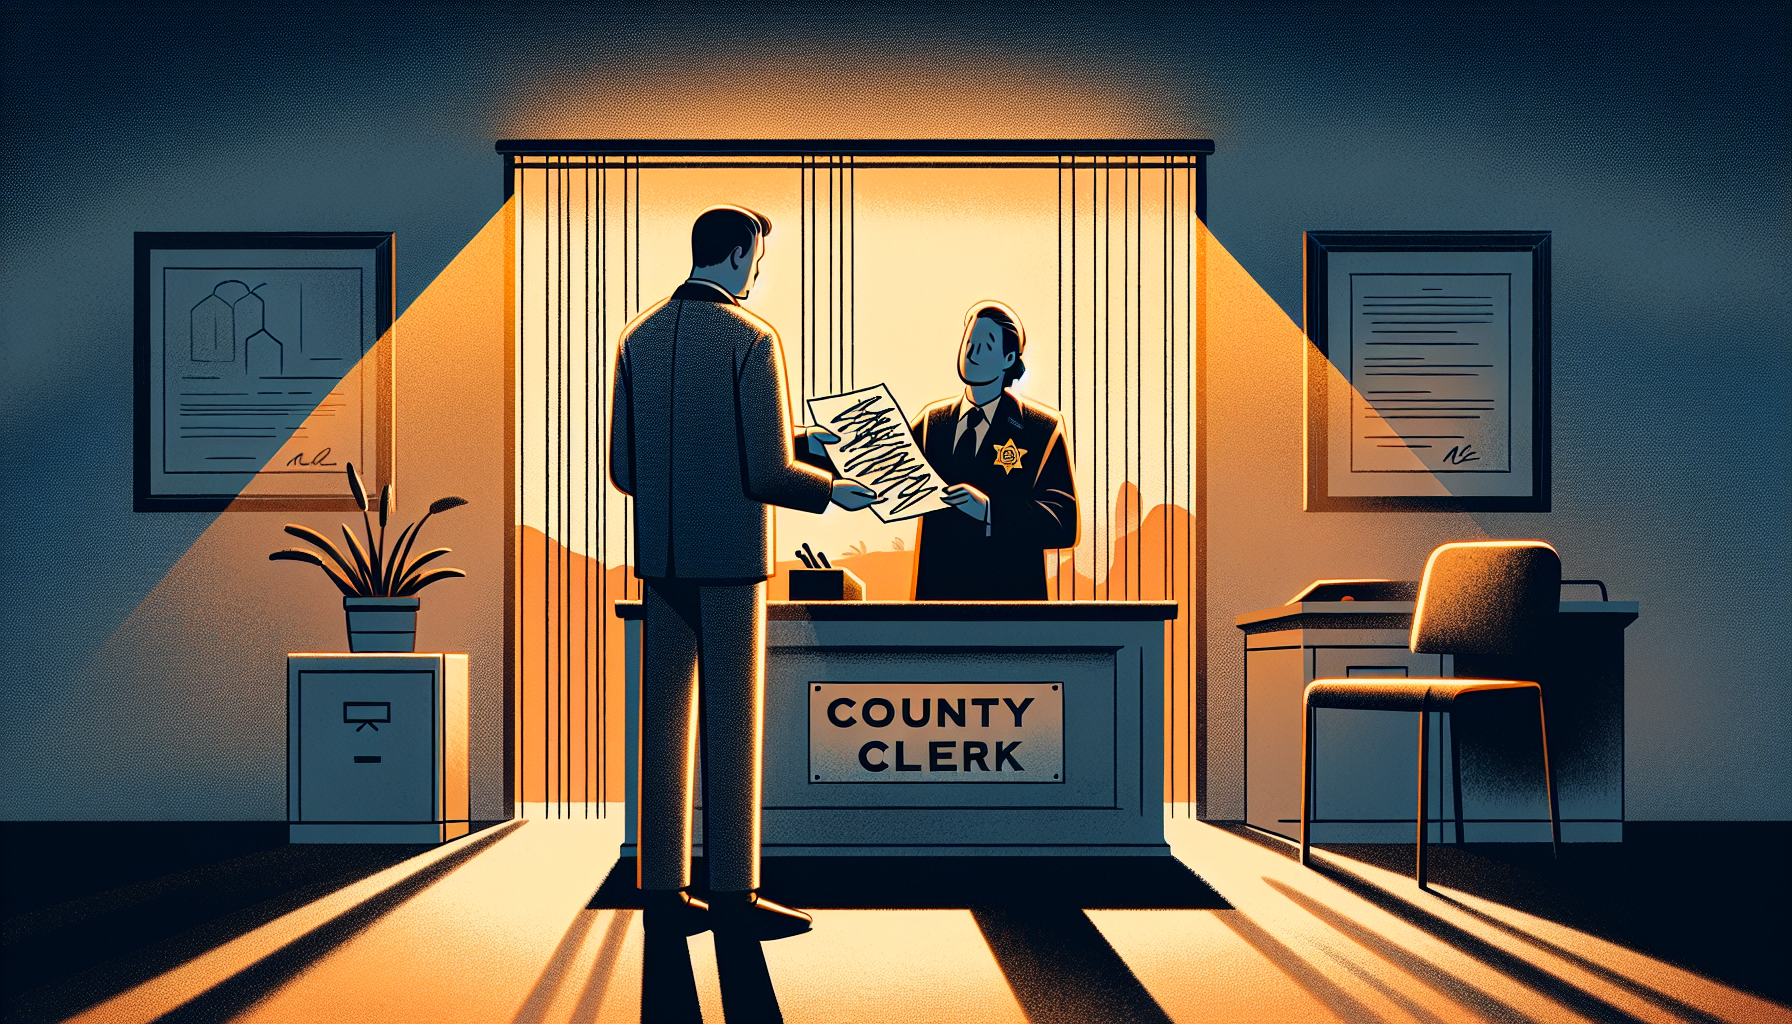 Illustration of a person obtaining a divorce decree from the county clerk